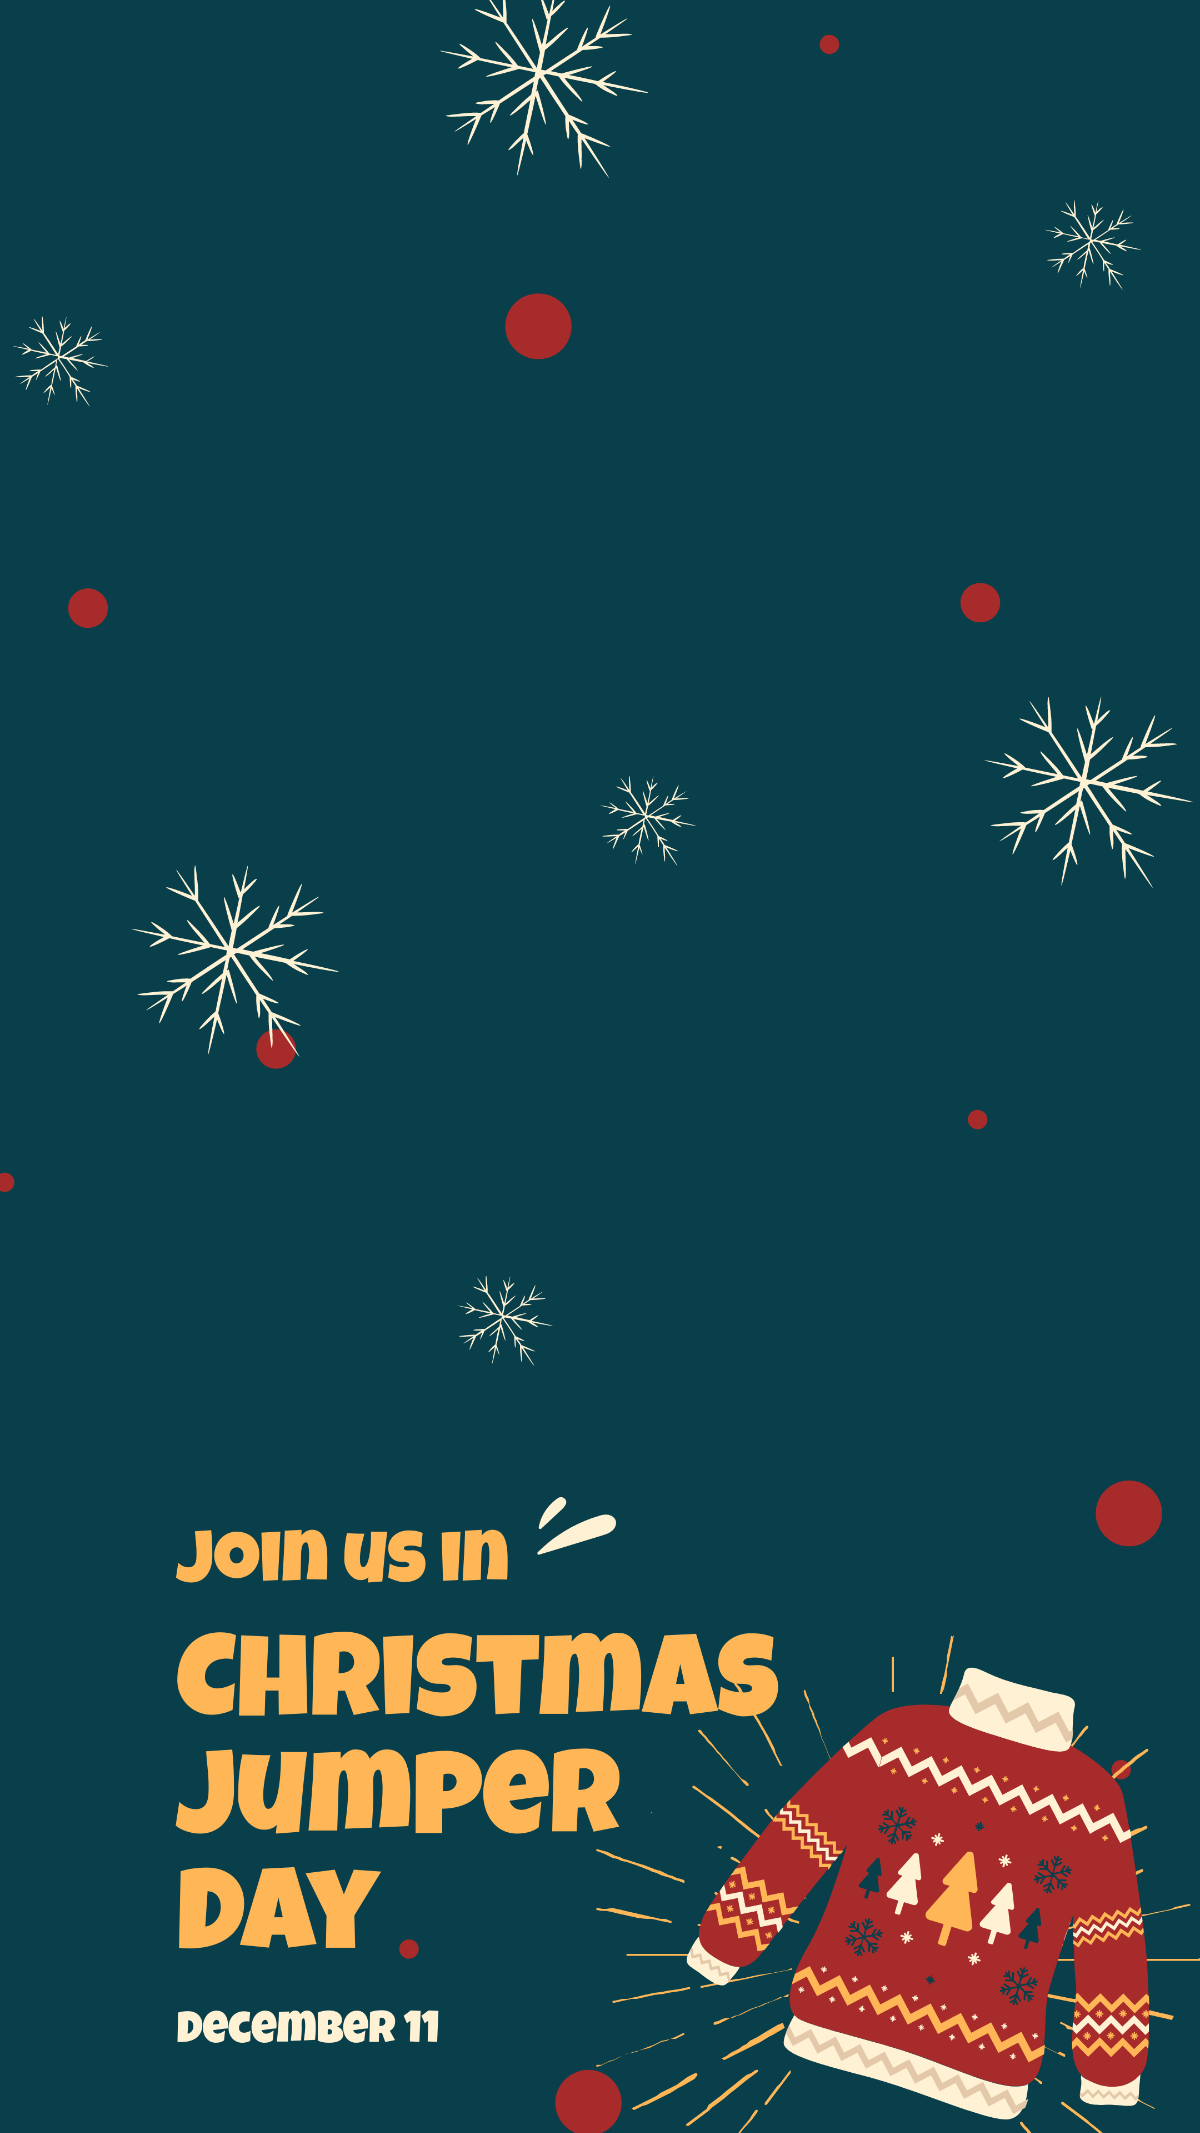 Free Christmas Jumper Day Snapchat Geofilter Template